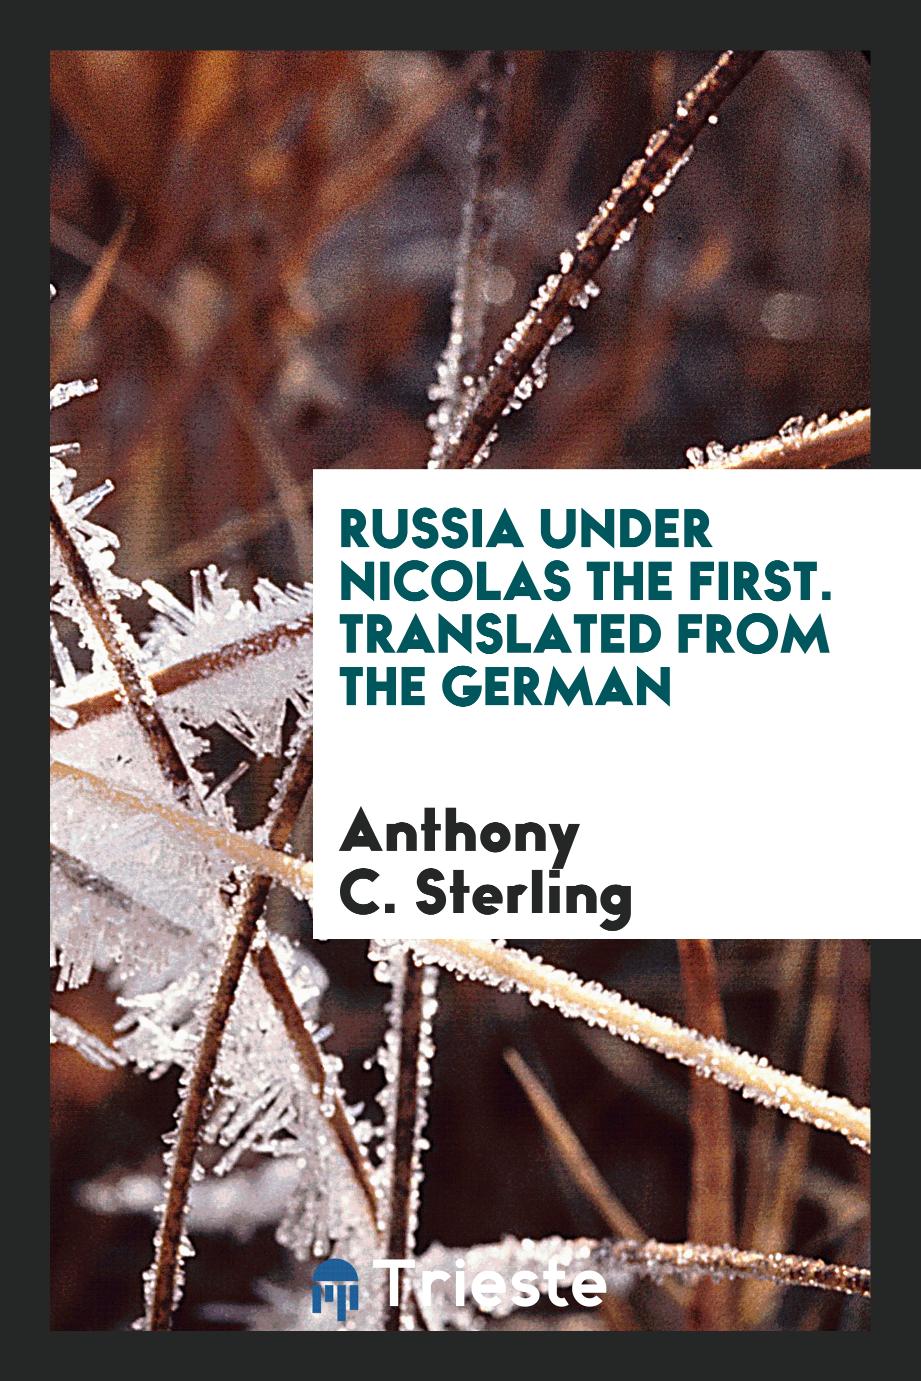 Russia Under Nicolas the First. Translated from the German